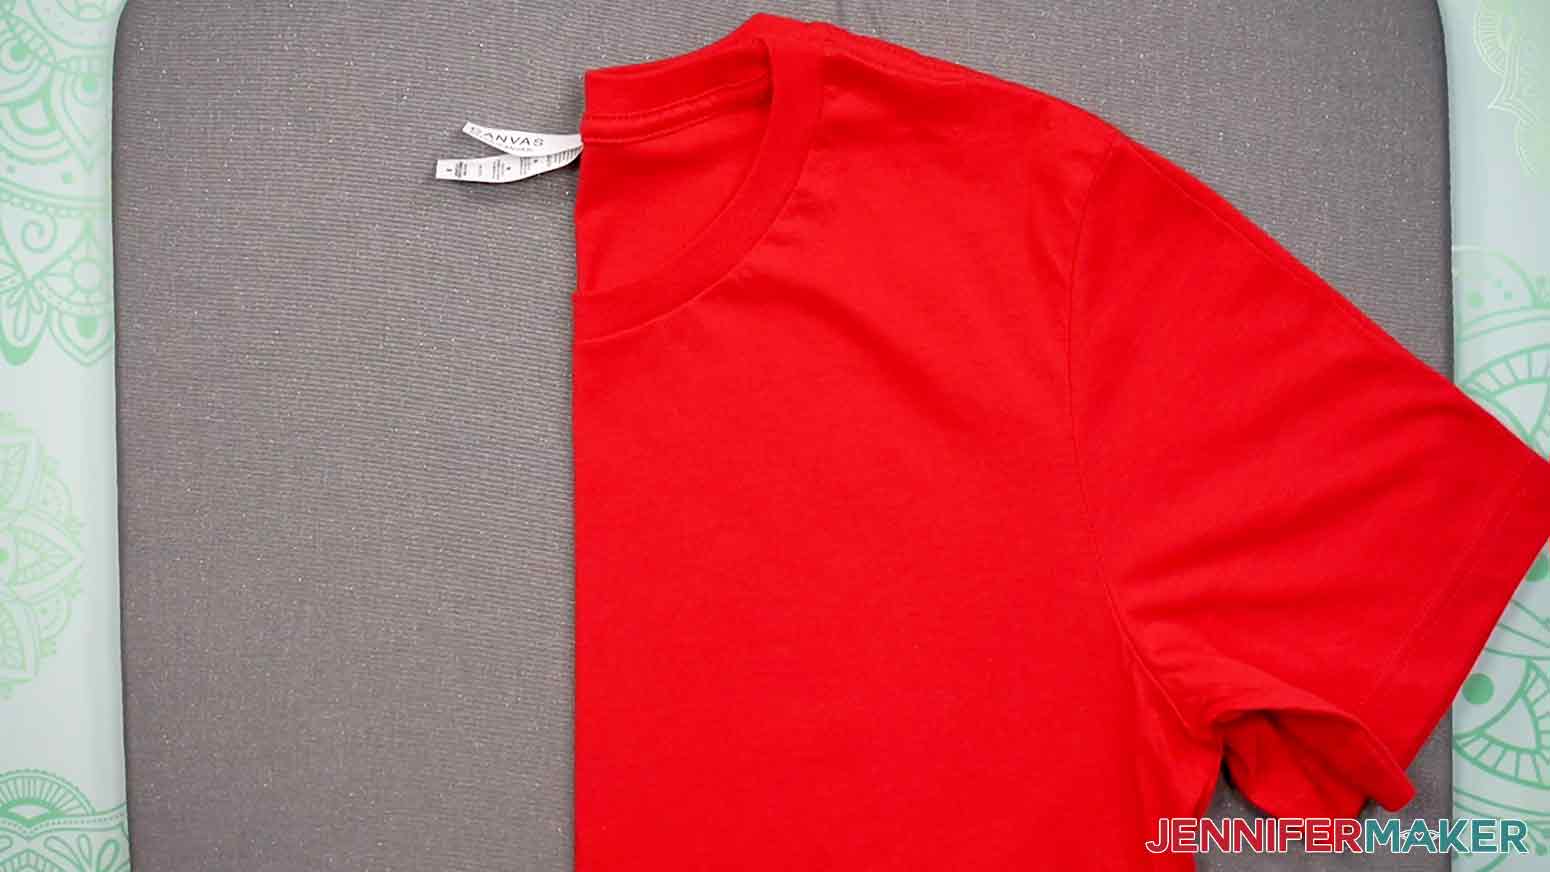 Fold your red, adult crew-neck T-shirt on the Cricut EasyPress Mat to create the center crease mark you will use to align the T-Shirt Ruler.